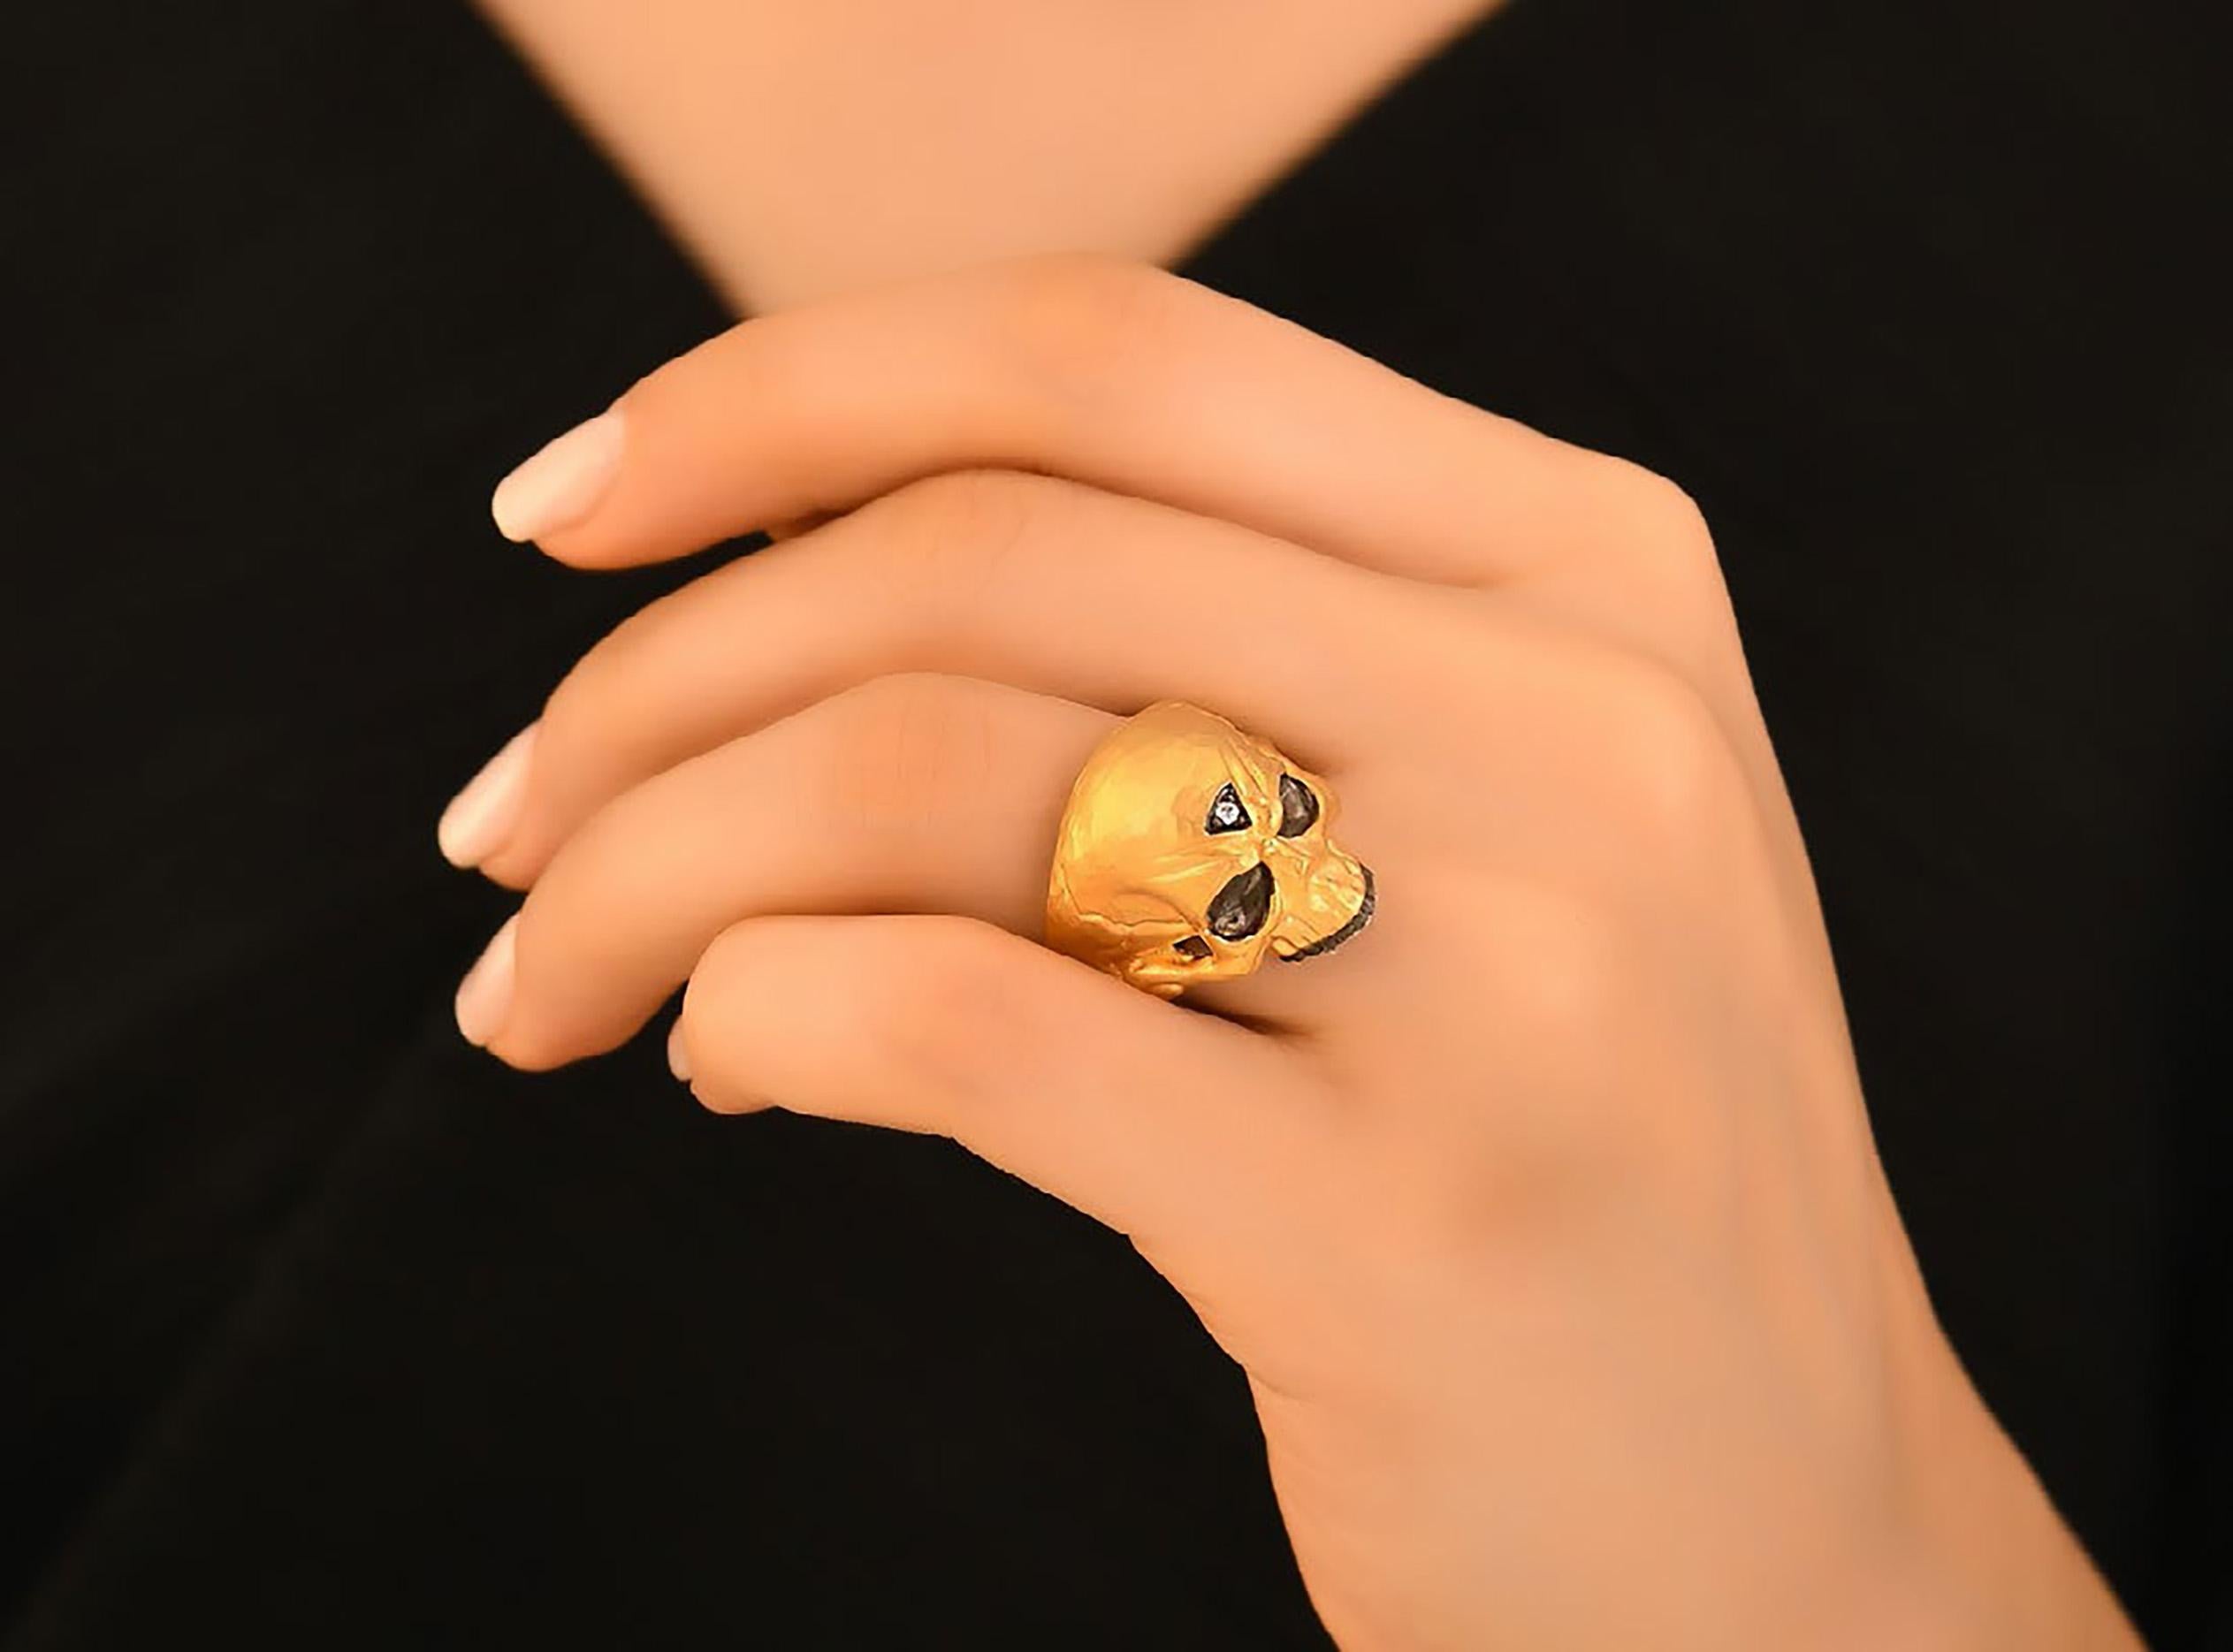 Momento Mori Skull Ring with Diamond 24k & SS by Kurtulan Jewellery of Istanbul, Turkey. 
Please contact the gallery for different sizes. This piece is made to order and will take approximately 4-6 weeks for delivery.
ABOUT KURTULAN